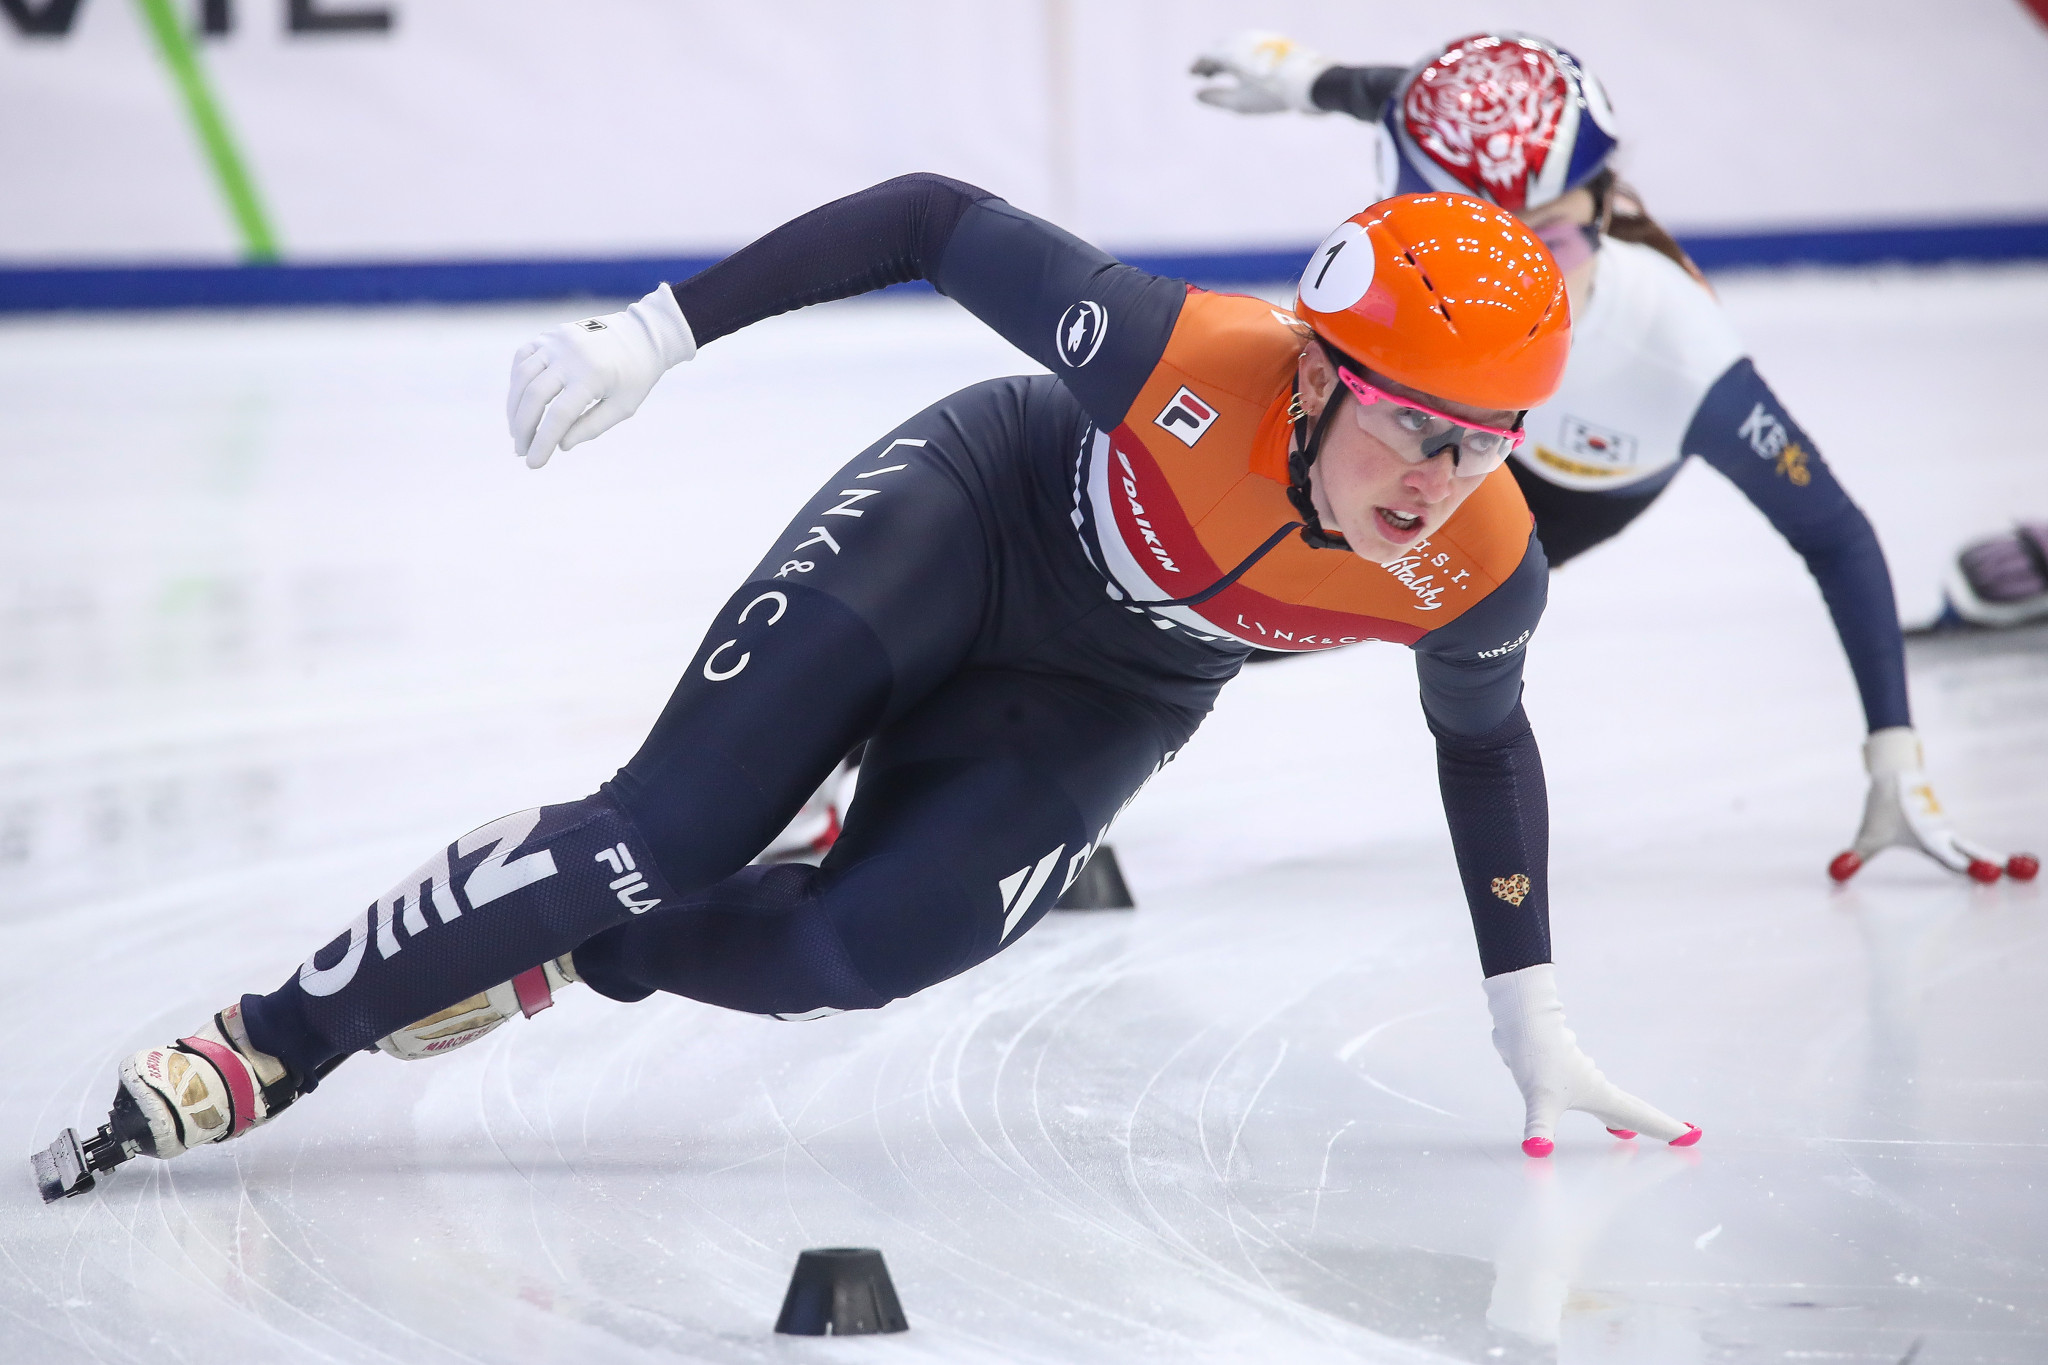 The Netherlands' Suzanne Schulting is through to the women's 1,500m semi-finals and 500m quarter-finals at the ISU Short Track Speed Skating World Cup in Debrecen ©Getty Images